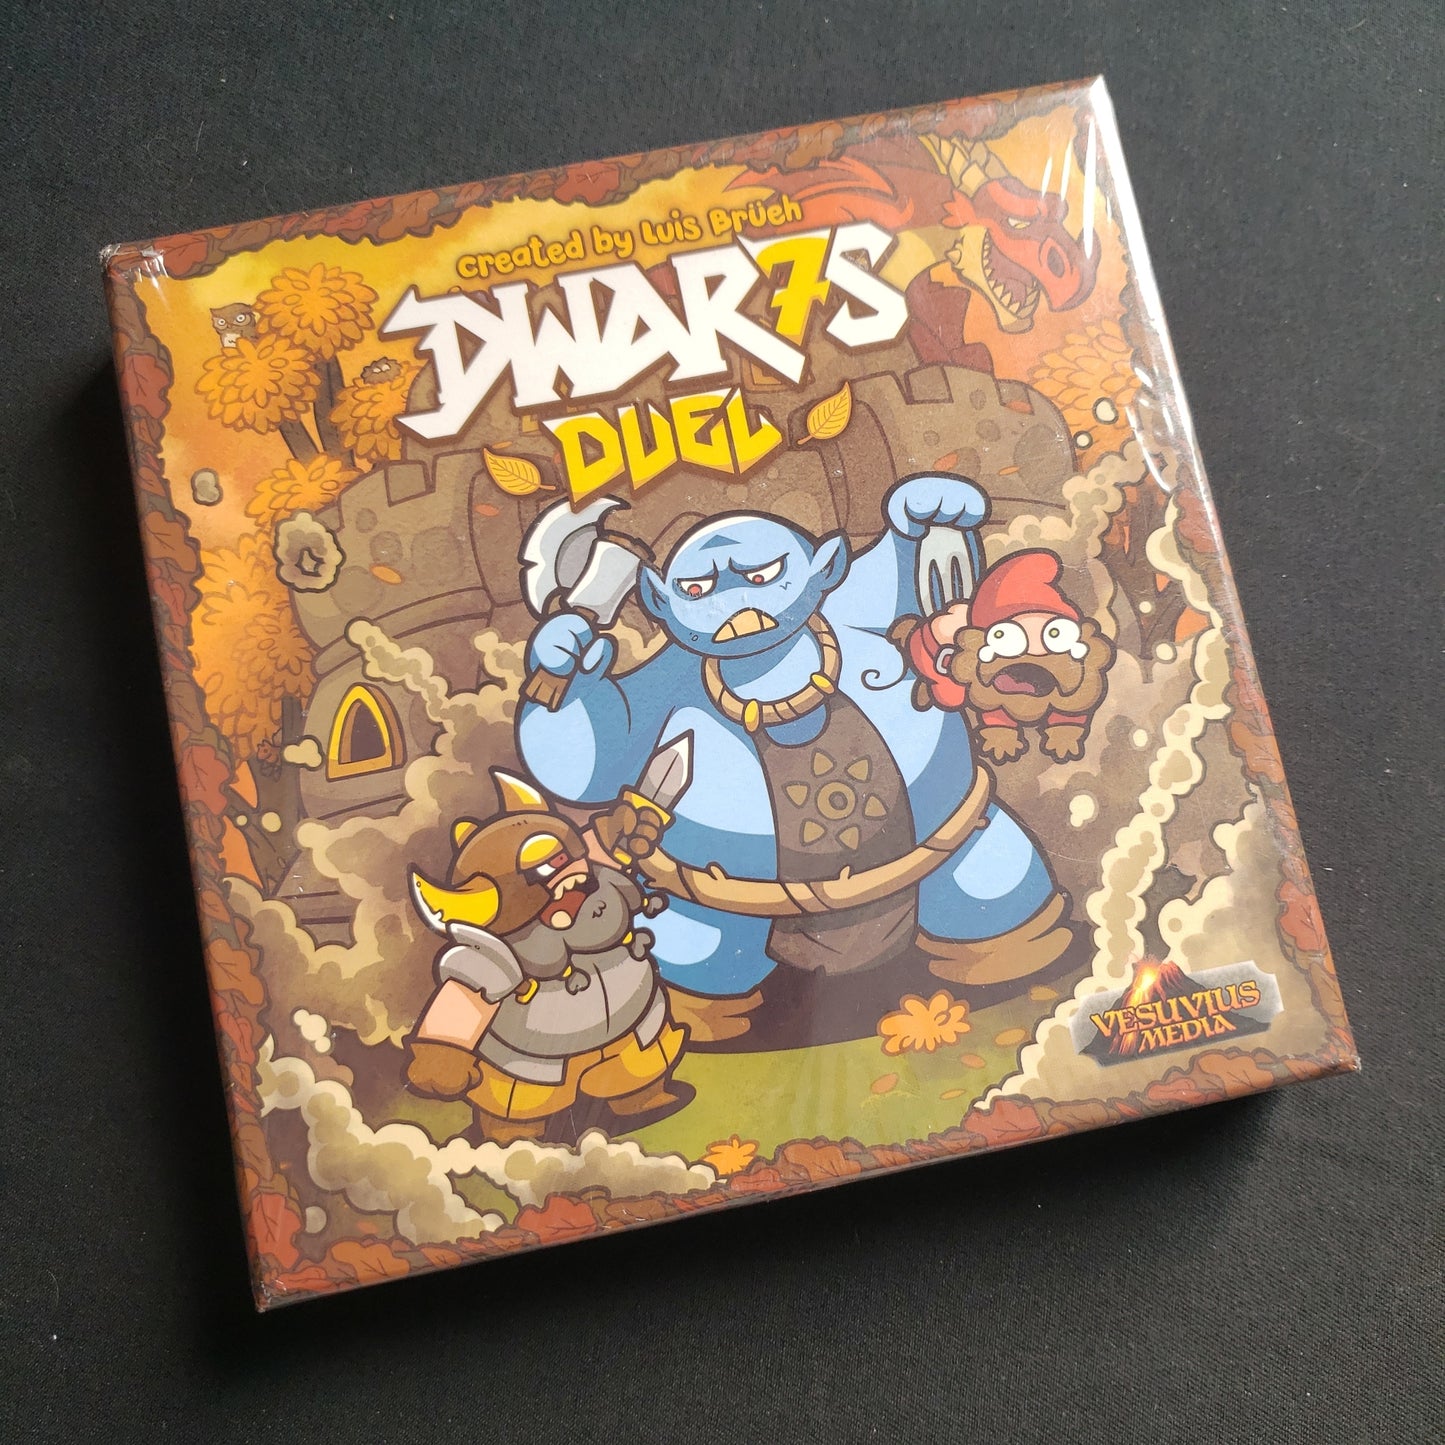 Image shows the front cover of the box of the Dwar7s Duel board game